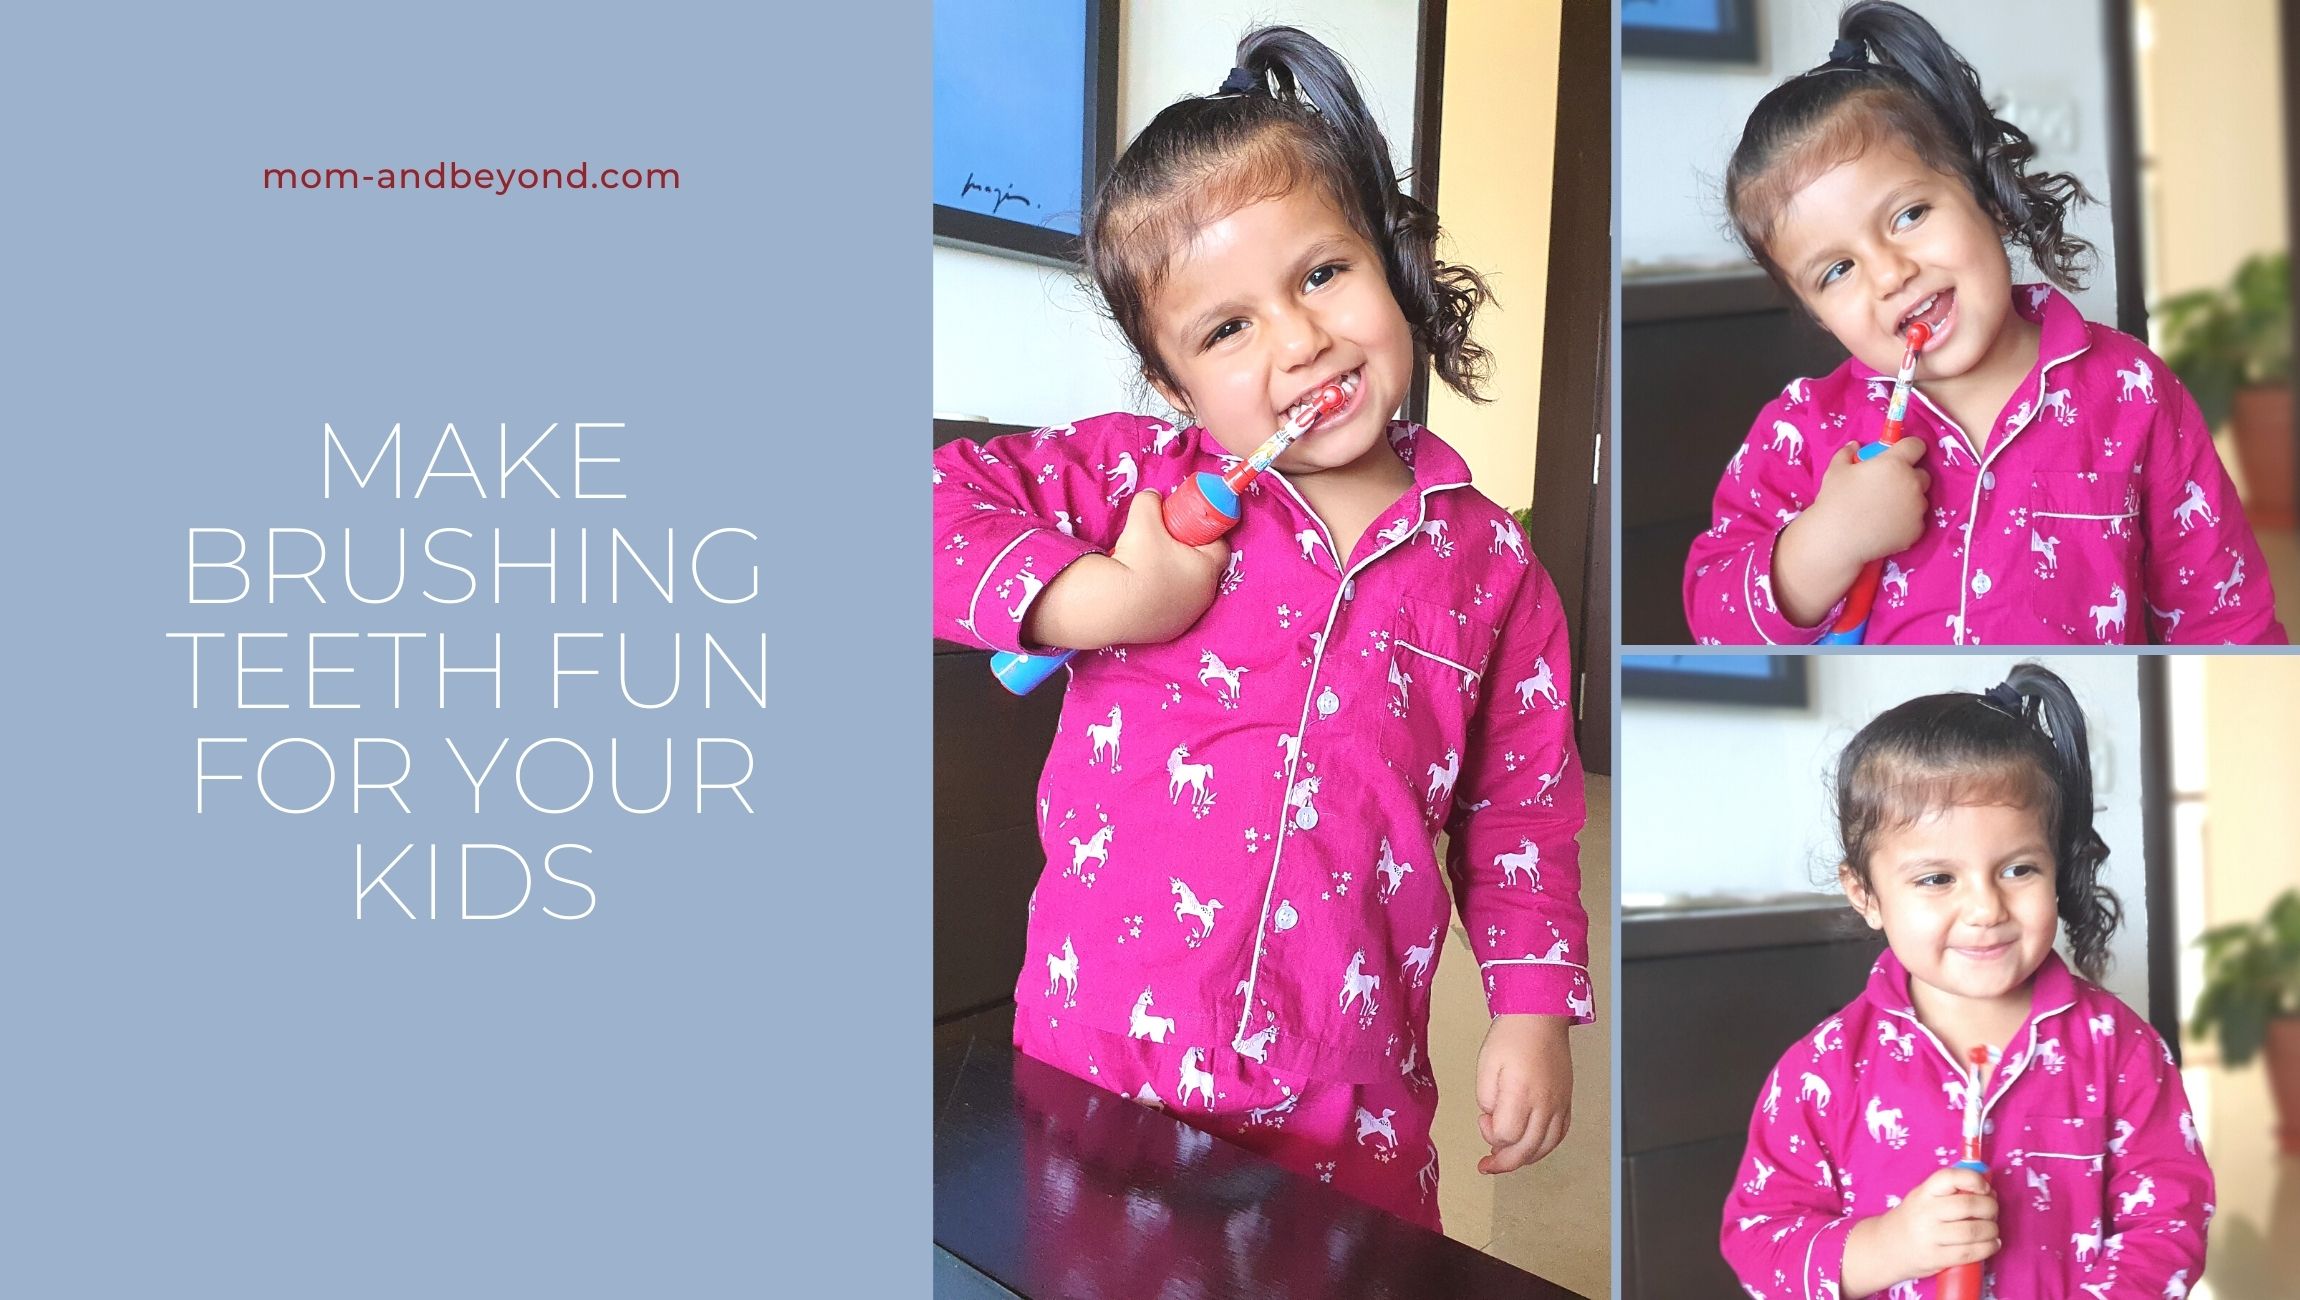 How To Make Brushing Teeth Fun For Your Kids